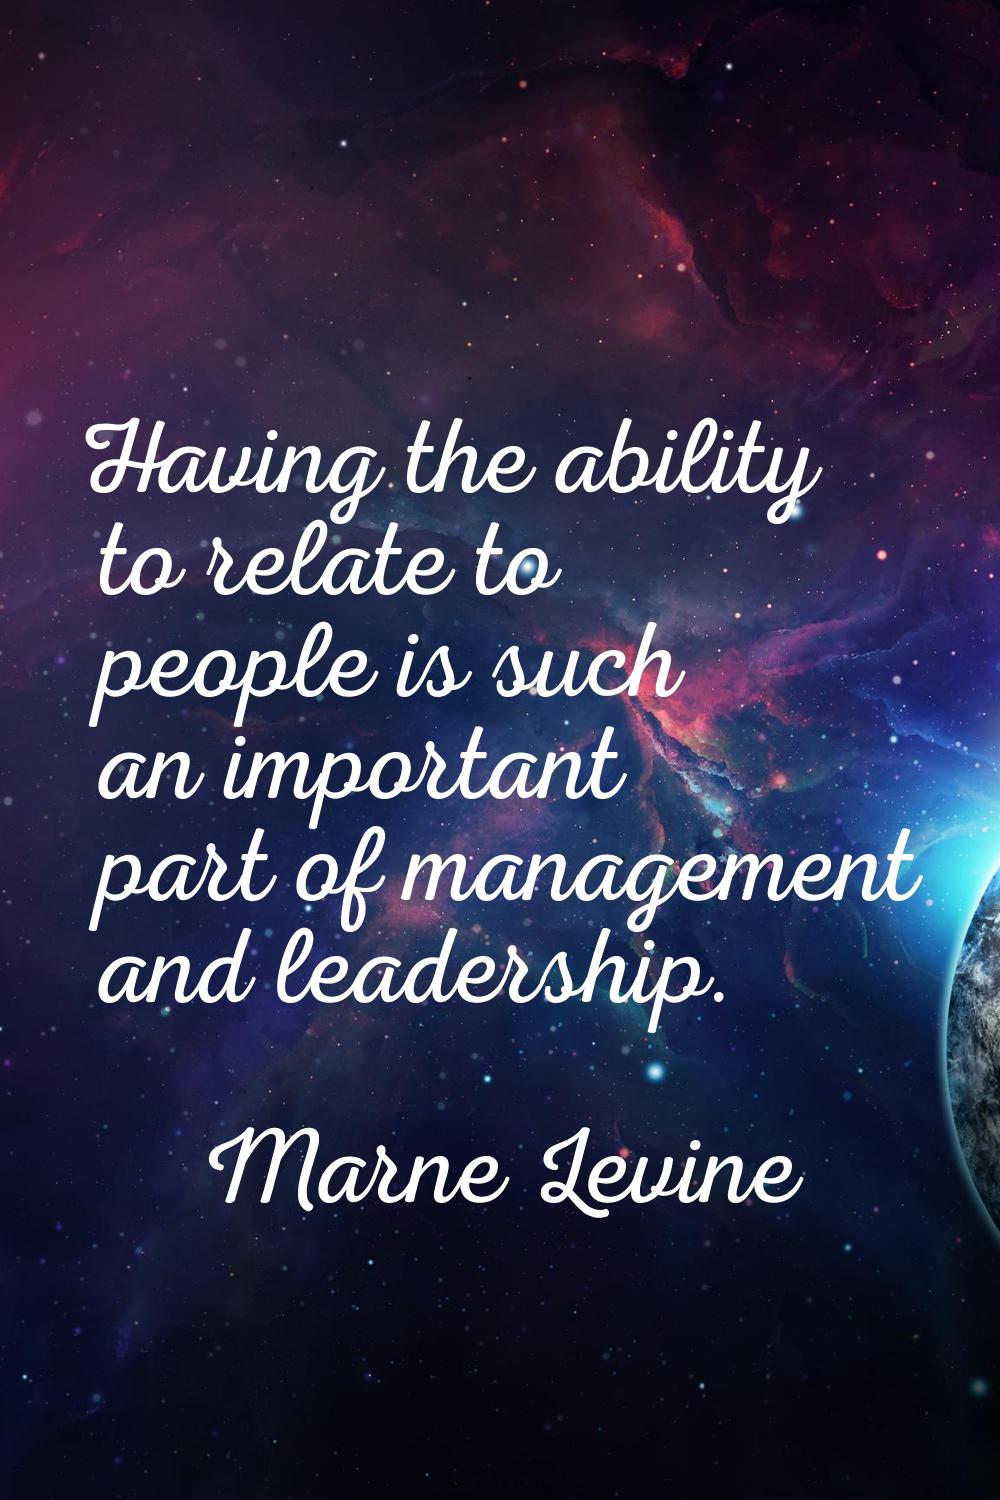 Having the ability to relate to people is such an important part of management and leadership.